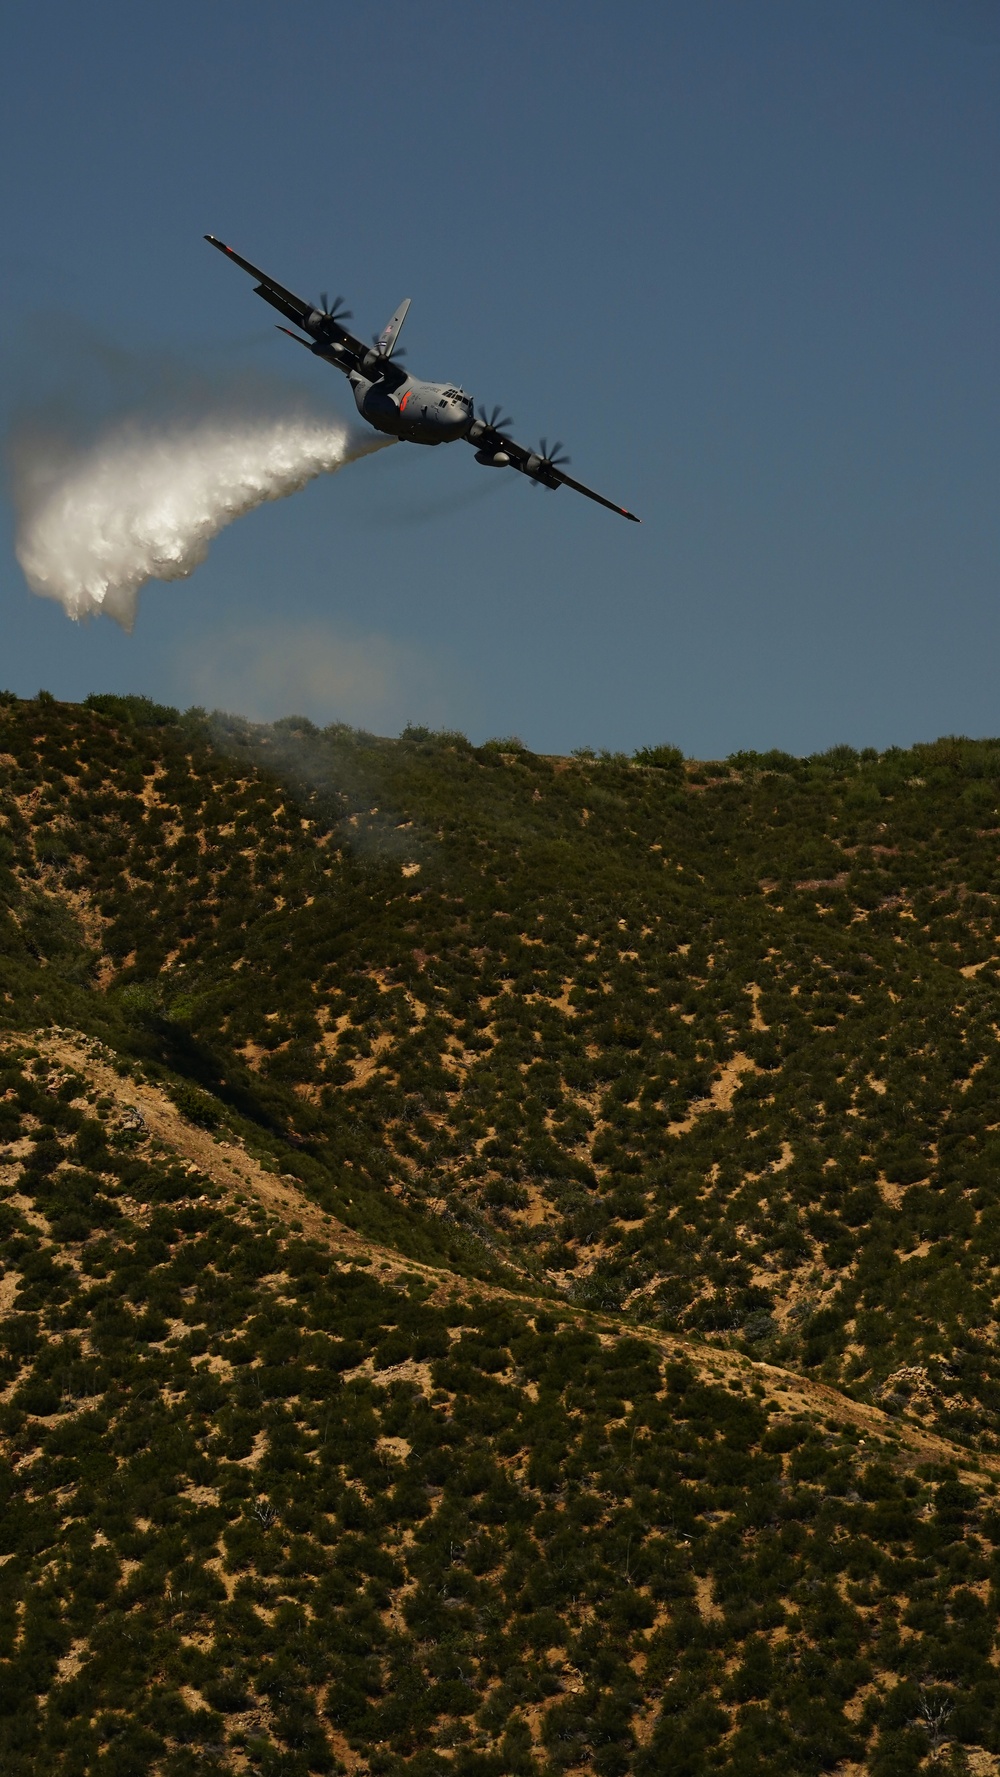 50 years of aerial wildland fire training culminating at Channel Islands Air National Guard Station